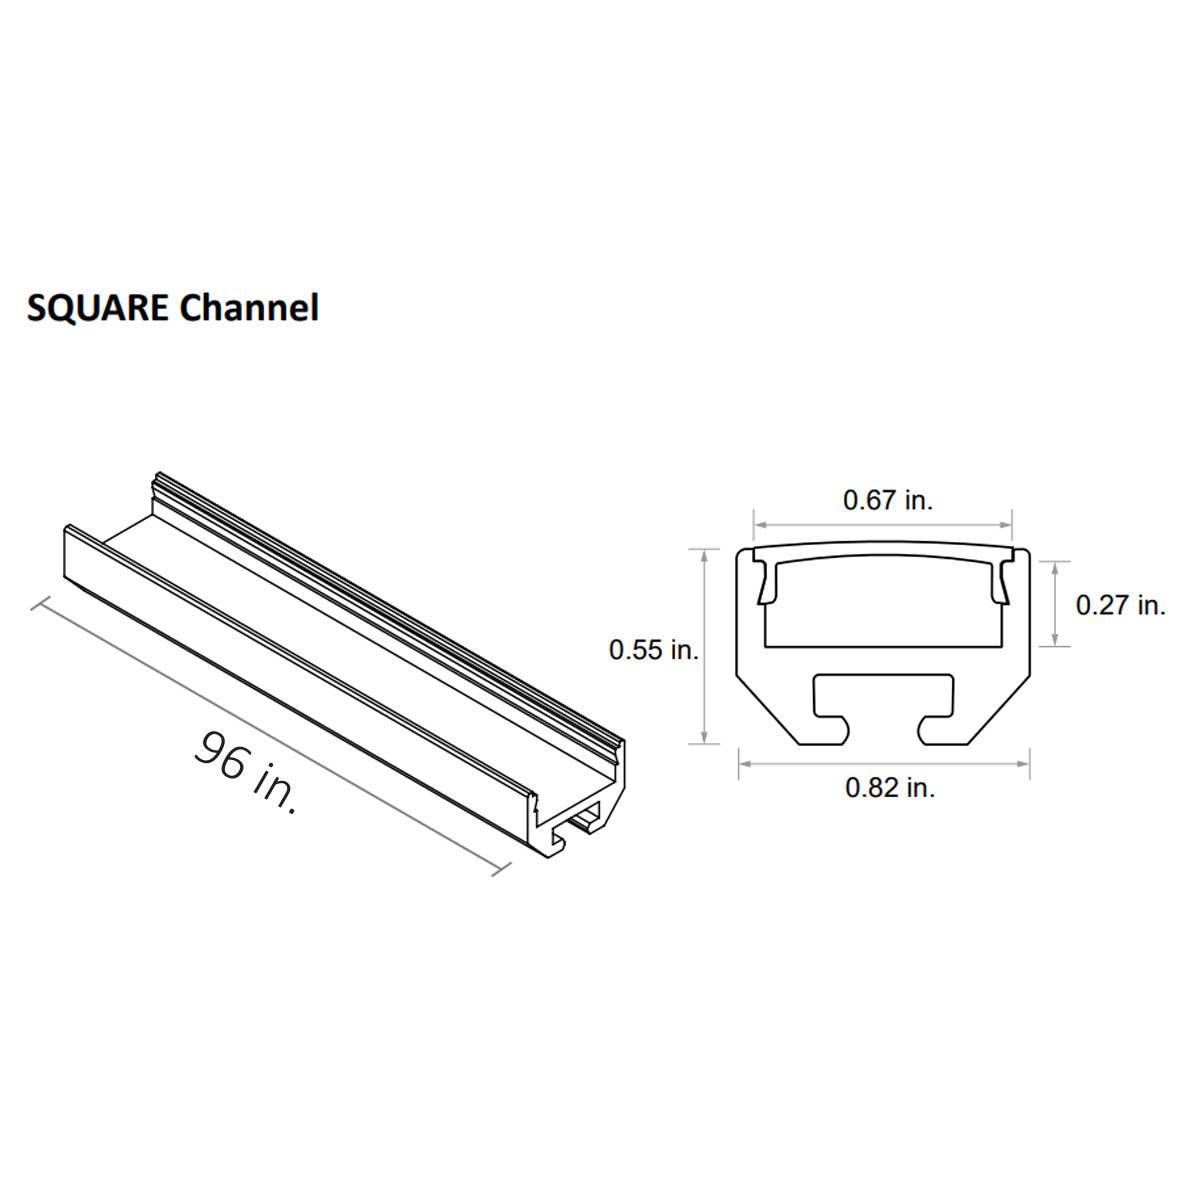 96in. Chromapath Builder, Square LED Aluminum Channels for 12mm strip lights, Pack of 10 - Bees Lighting